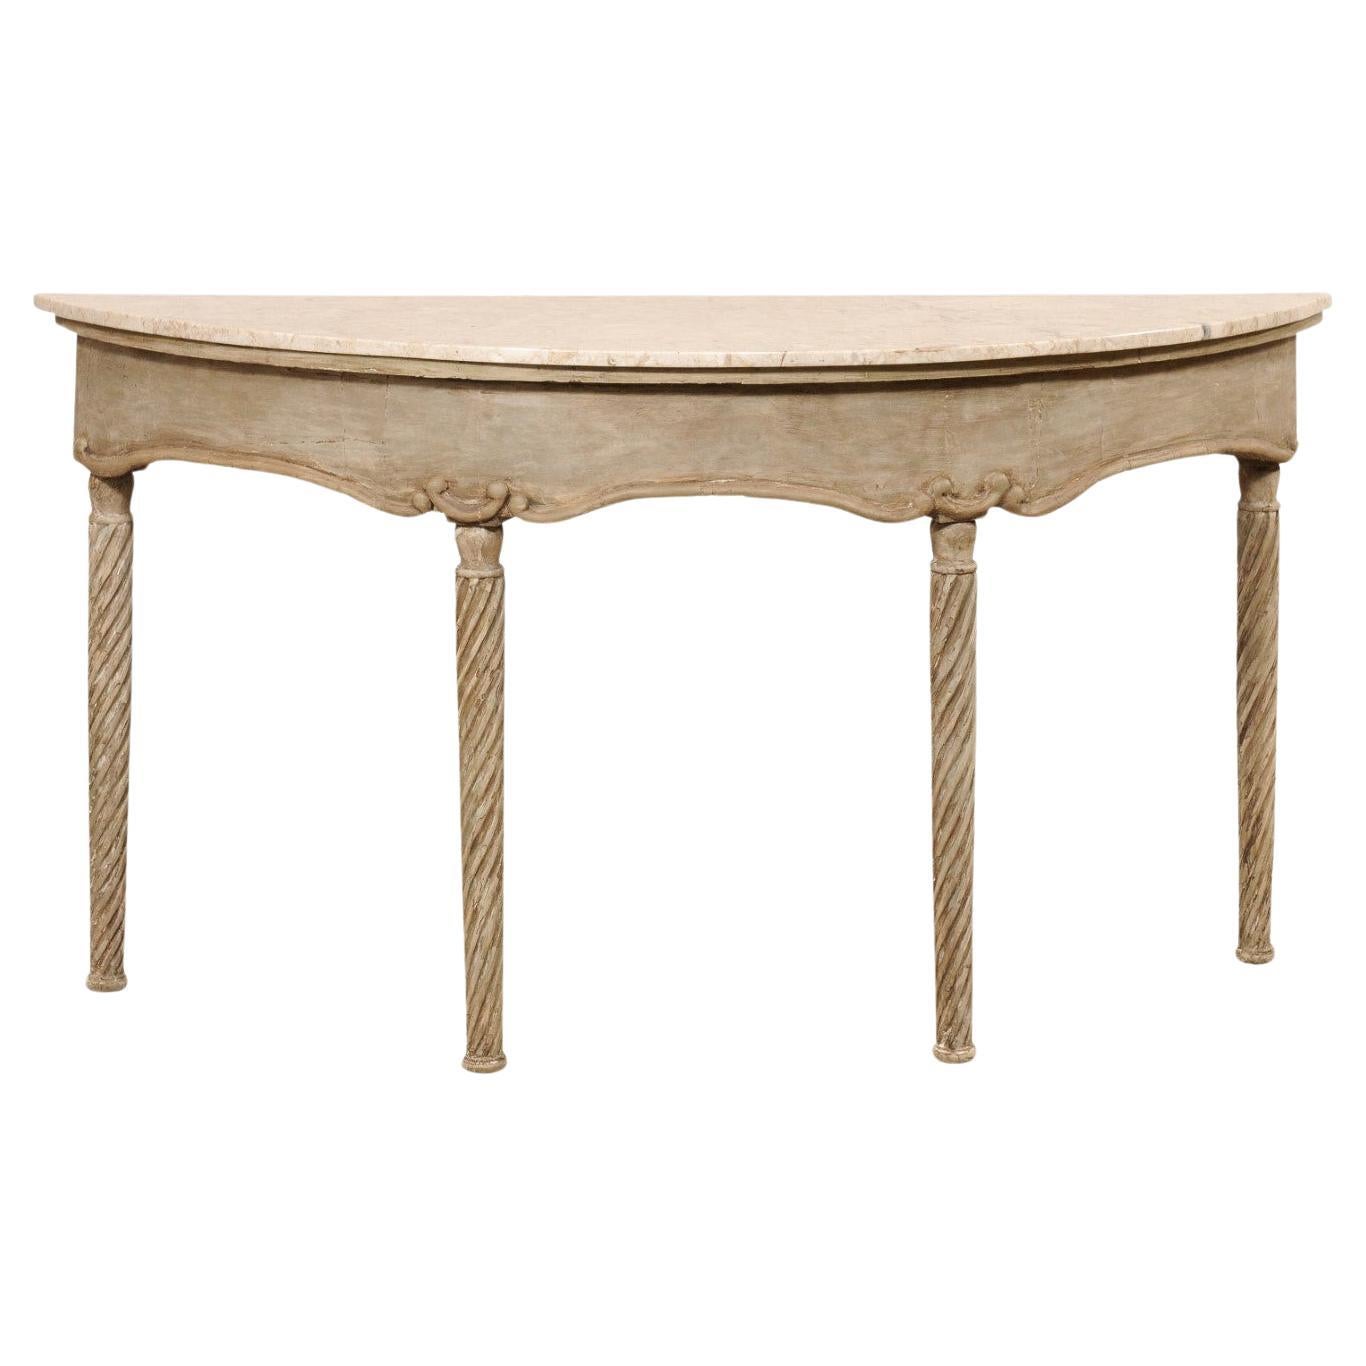 18th Century French Marble Top Console w/Spiral Carved Legs, Oblong Demi-Shaped For Sale